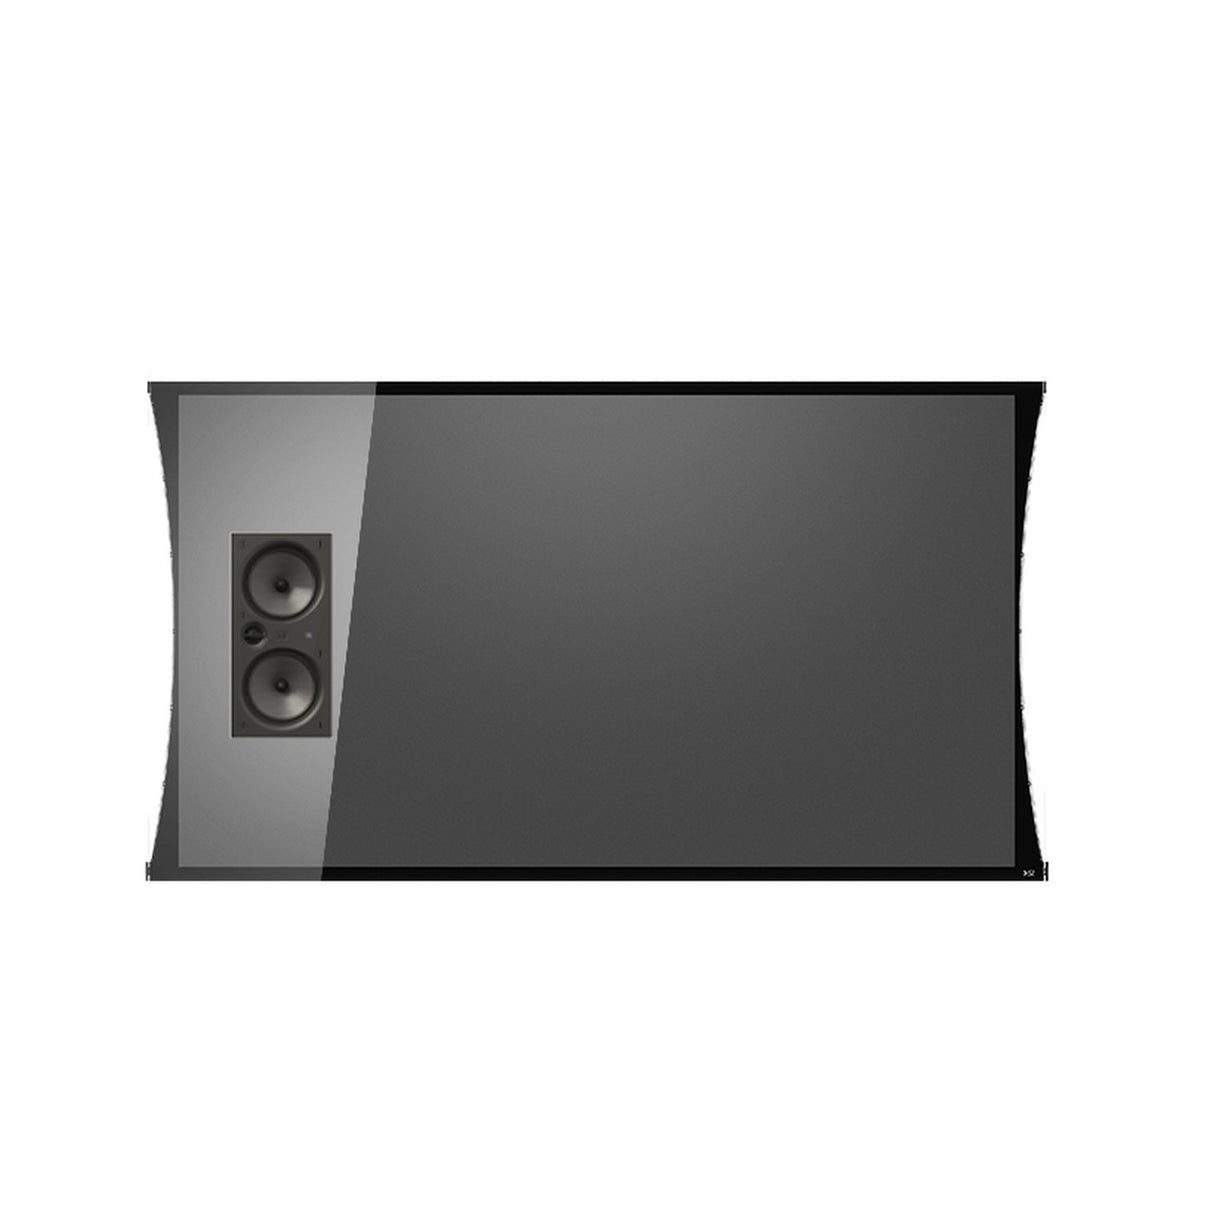 Screen Innovations 5TGFL80SL8AT | 80 Inch 5 Series Slate 0.8 Gain Zero-G Acoustic Projection Screen